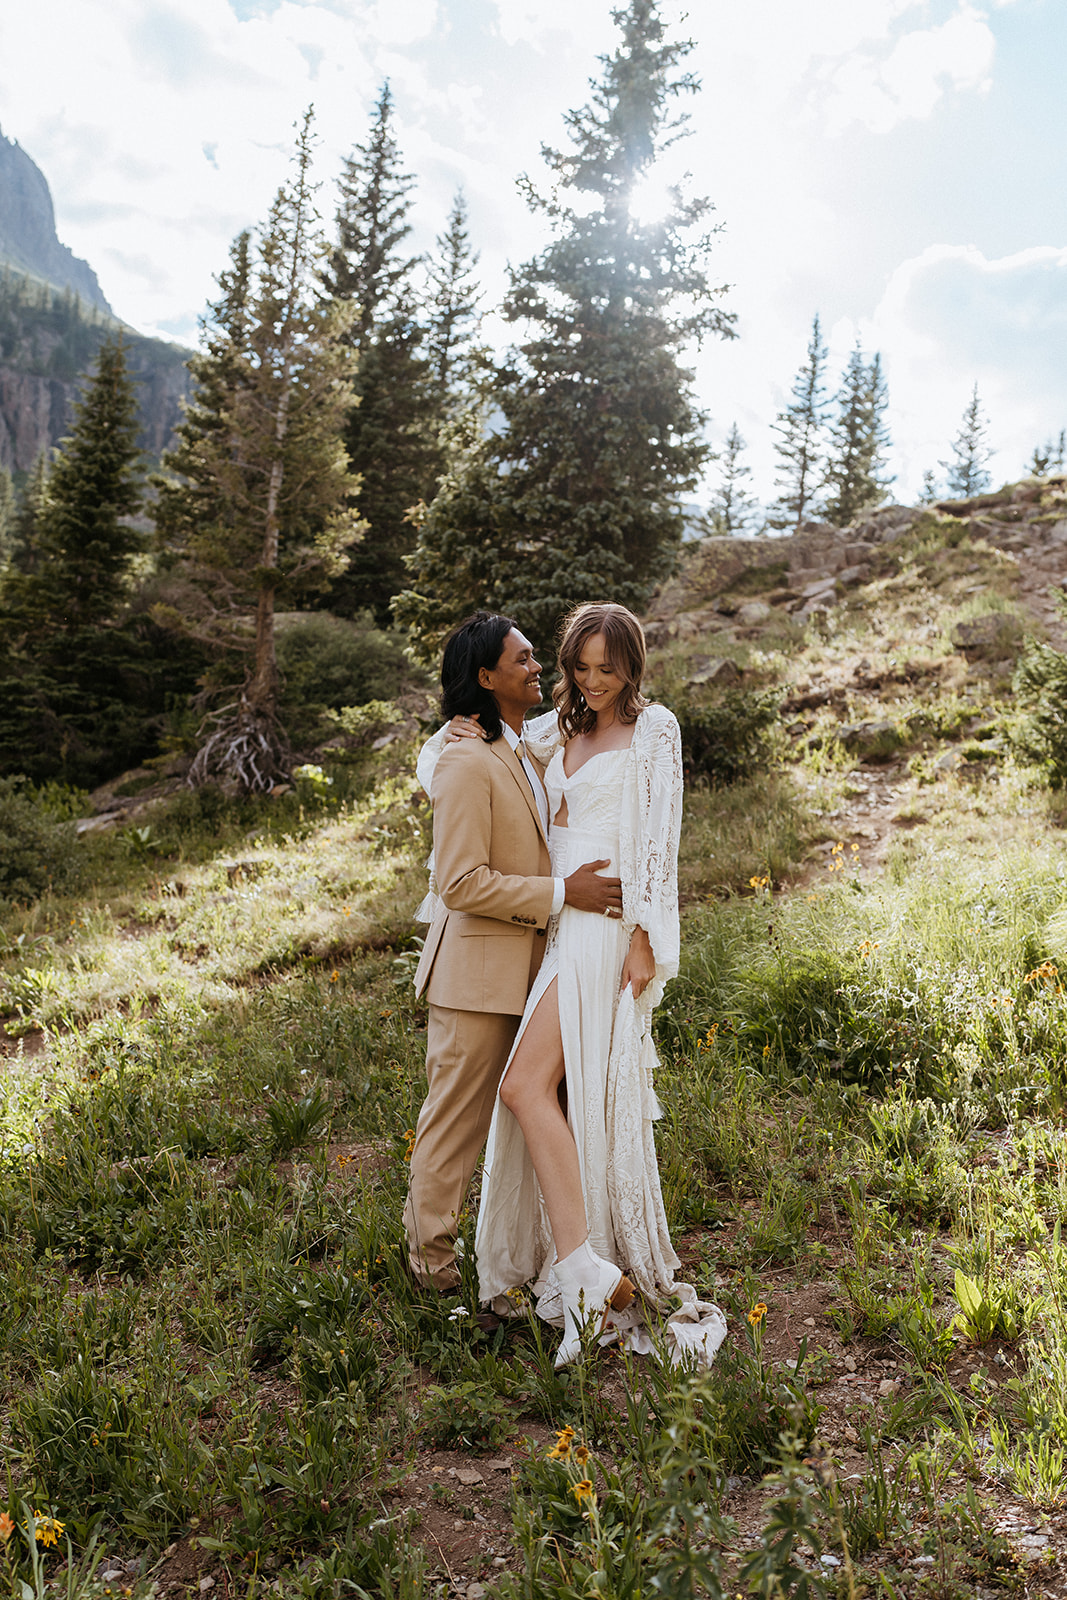 Newlyweds shore an intimate moment with smiles at sunset on a remote hillside